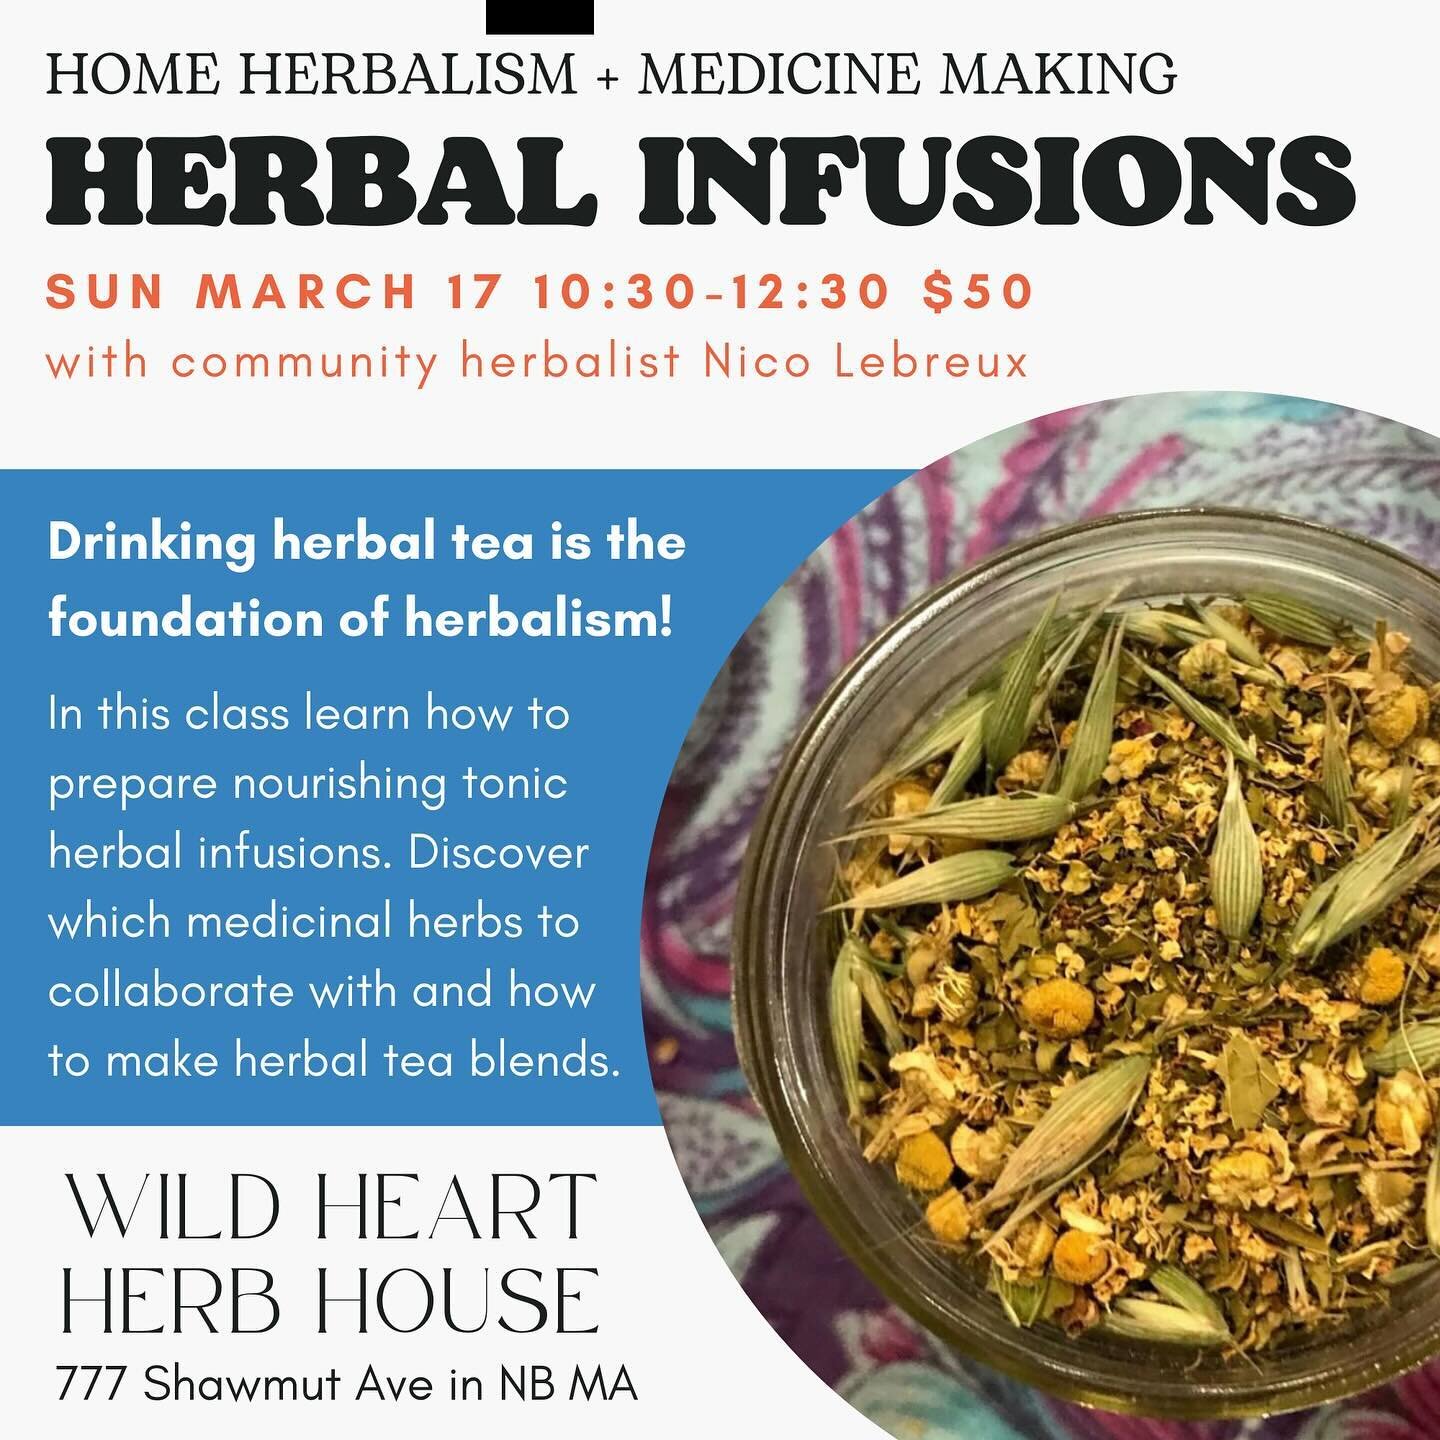 Learn everything you need to know about herbal infusions, a.k.a. herbal tea, this Sunday with me at Wild Heart Herb House!

Drinking herbal tea is the foundation of Herbalism and a skill that everyone can learn! 

in this class we will discuss how to